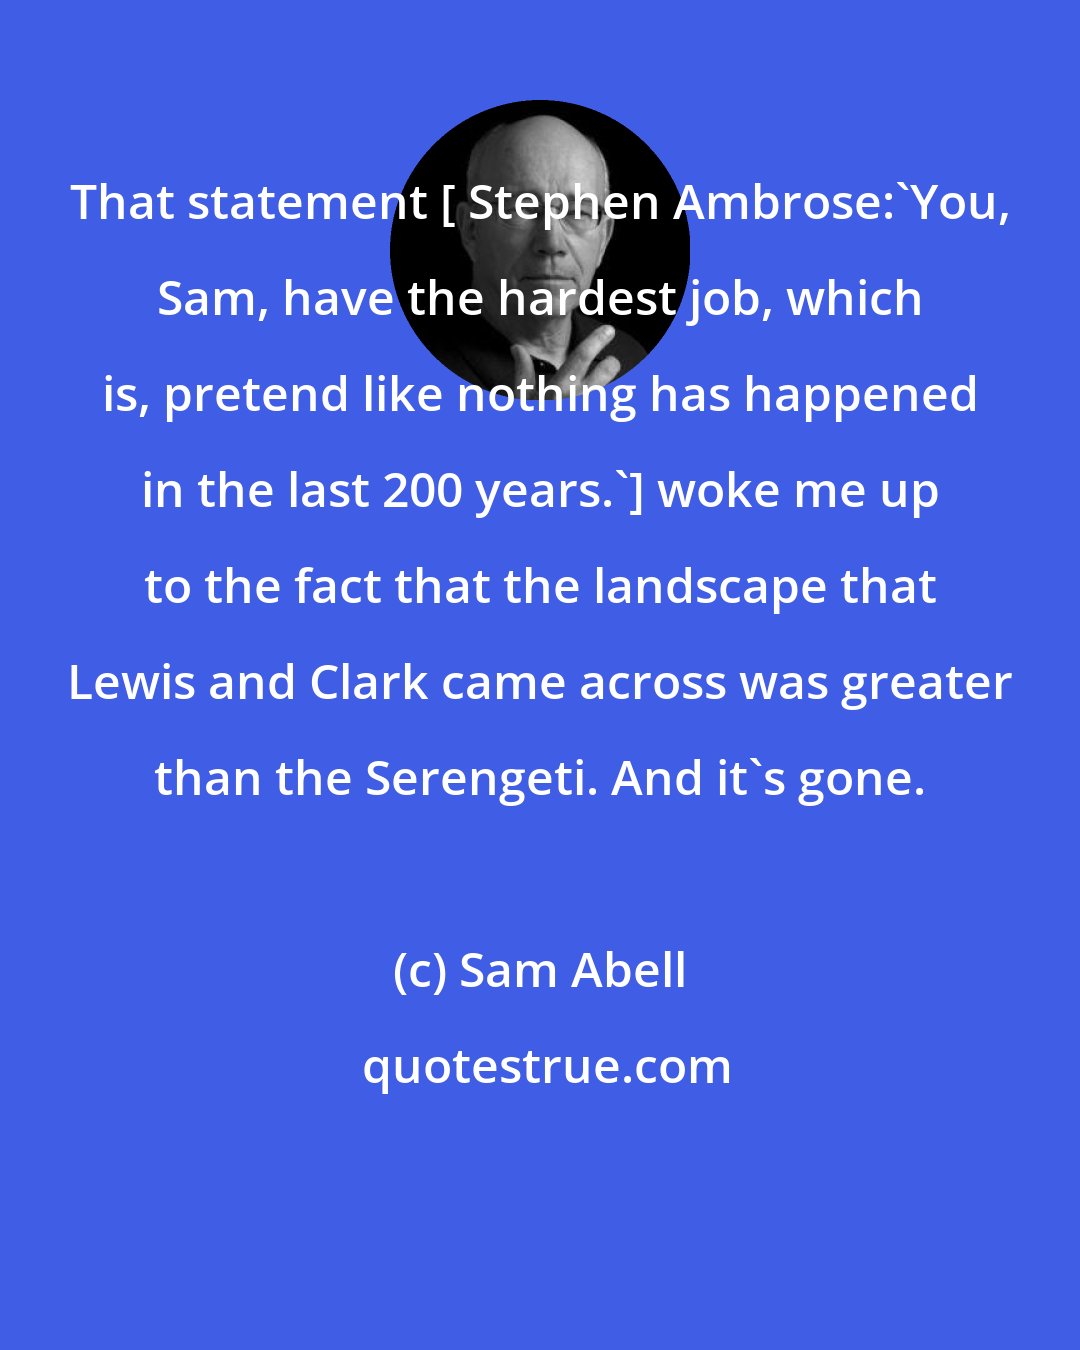 Sam Abell: That statement [ Stephen Ambrose:'You, Sam, have the hardest job, which is, pretend like nothing has happened in the last 200 years.'] woke me up to the fact that the landscape that Lewis and Clark came across was greater than the Serengeti. And it's gone.